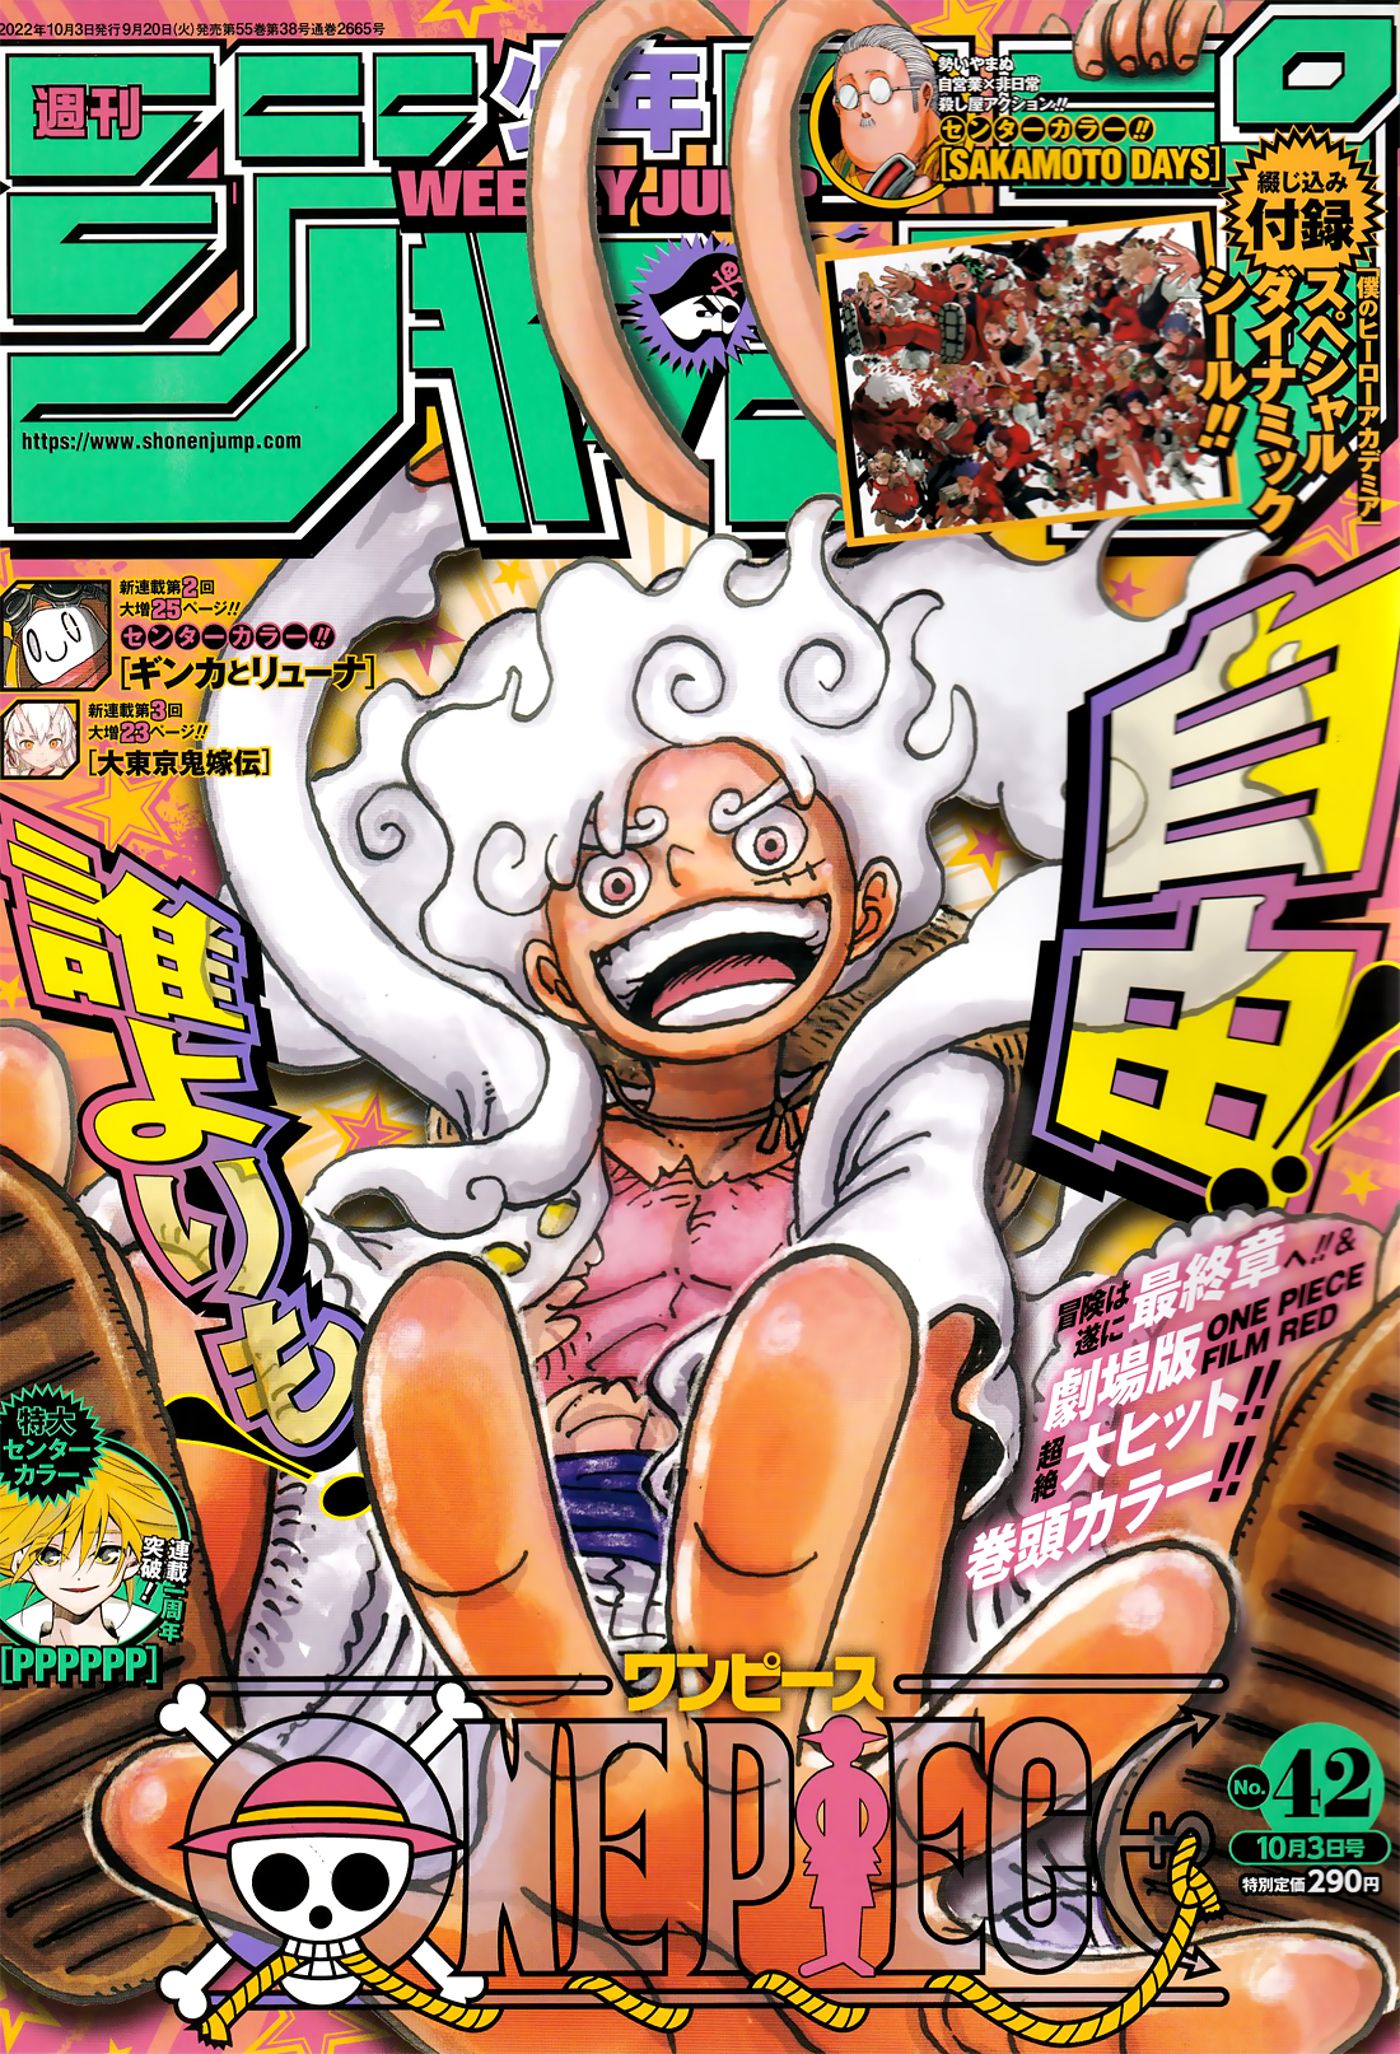 One-Piece-Luffy-Gear-Fifth-Shonen-Jump-cover-color